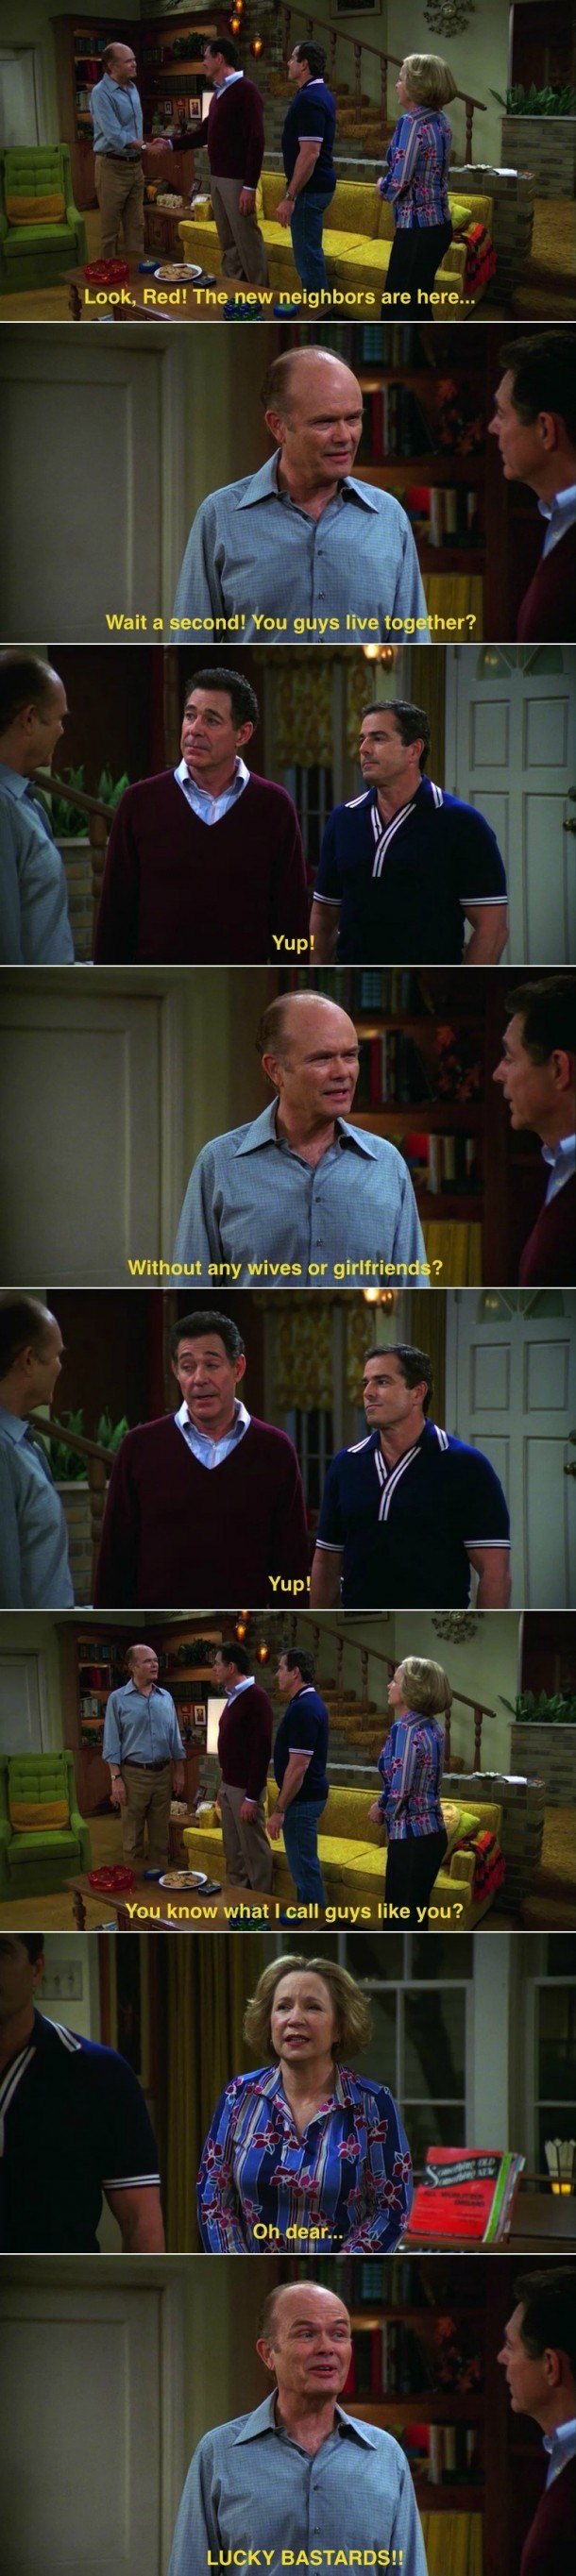 Red-meets-the-gay-neighbors-that-70s-show.jpg